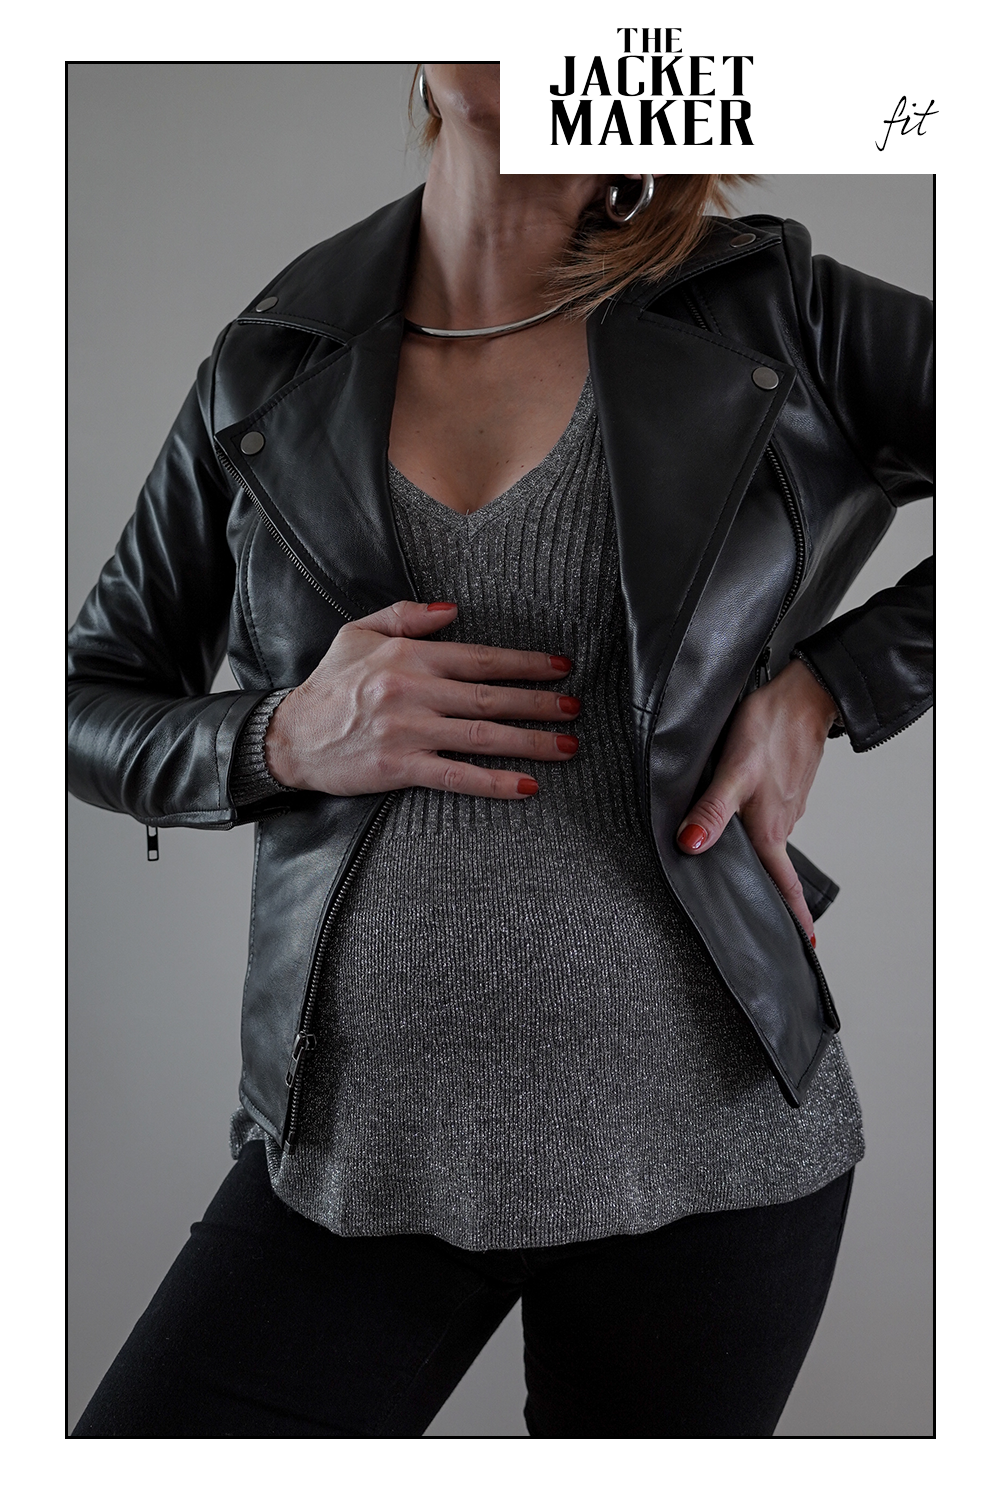  Jessica Ashley shows detailing and fit in The Jacket Maker’s Flashback Jacket in size XS | Womens Leather Jackets | Best leather jackets for women | Leather Jacket Review 